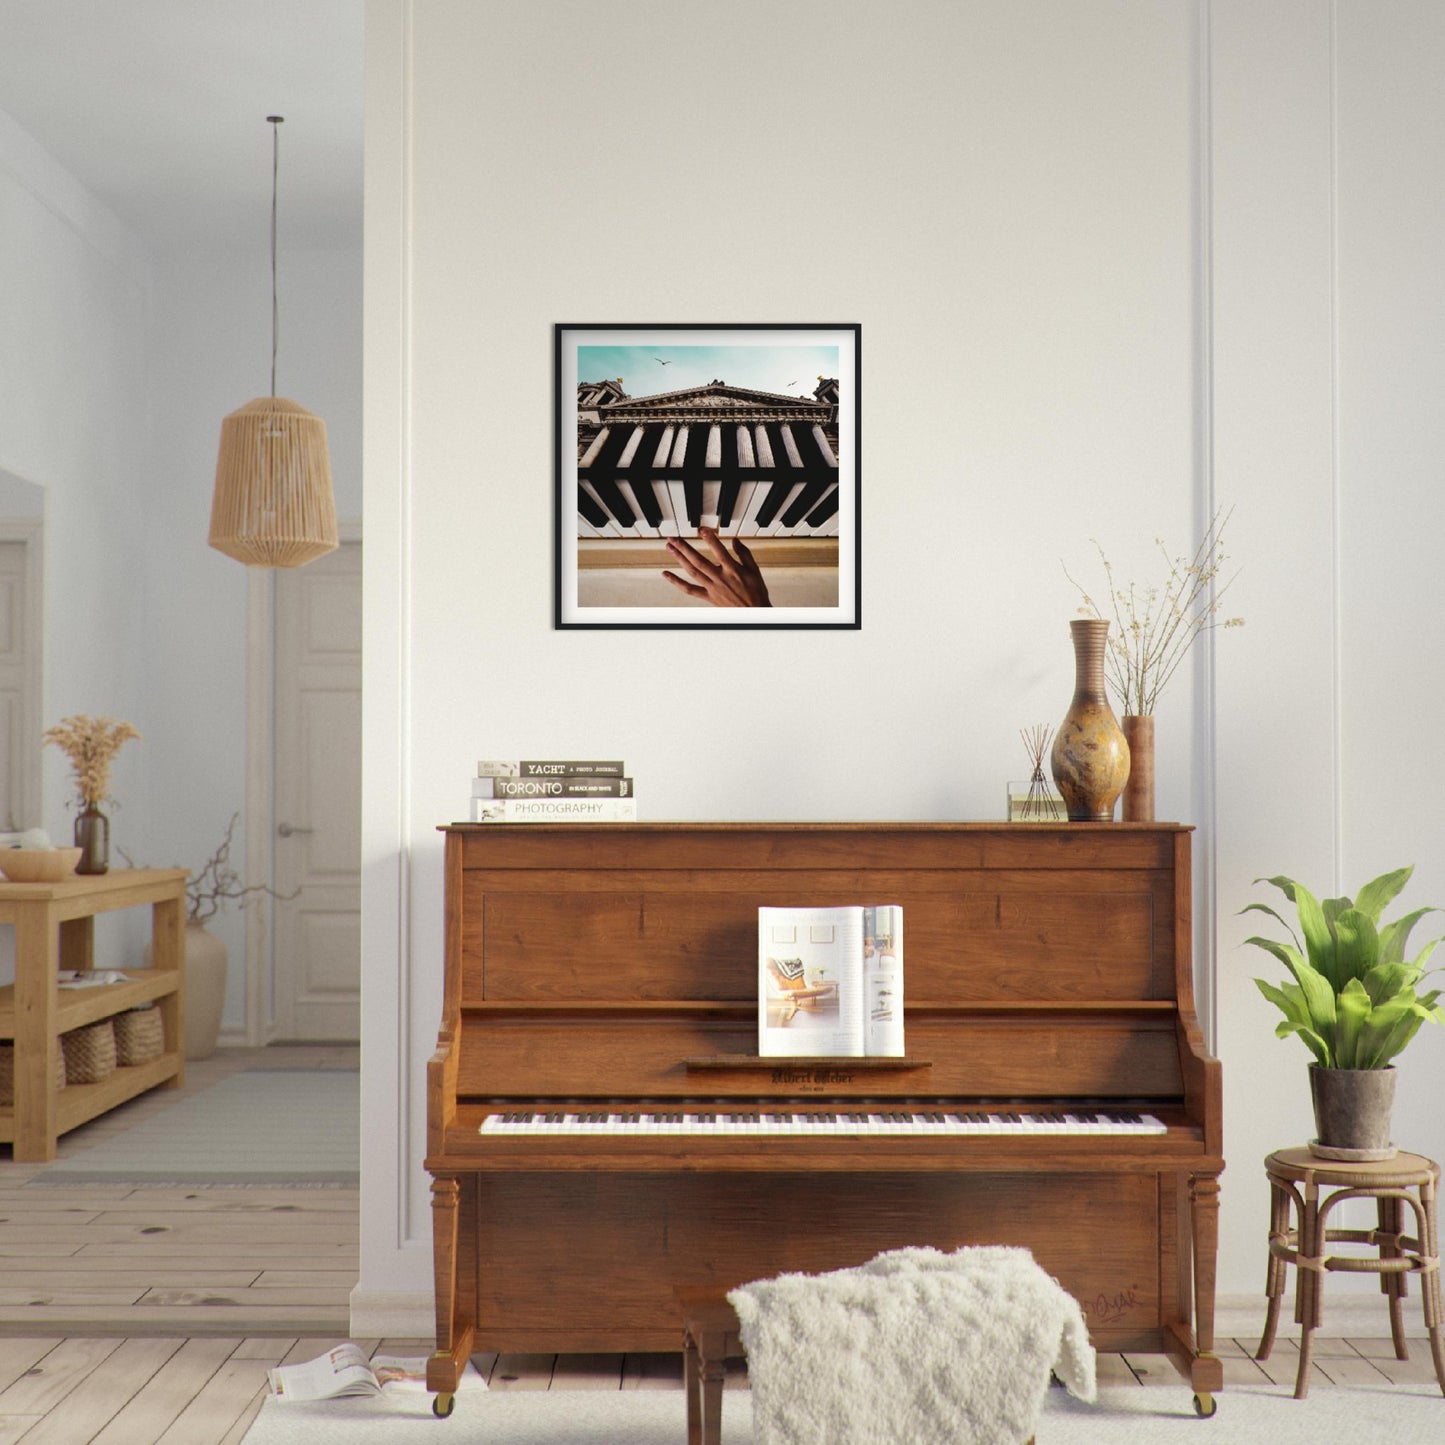 Architectural Symphony - Museum-Quality Framed Art Print